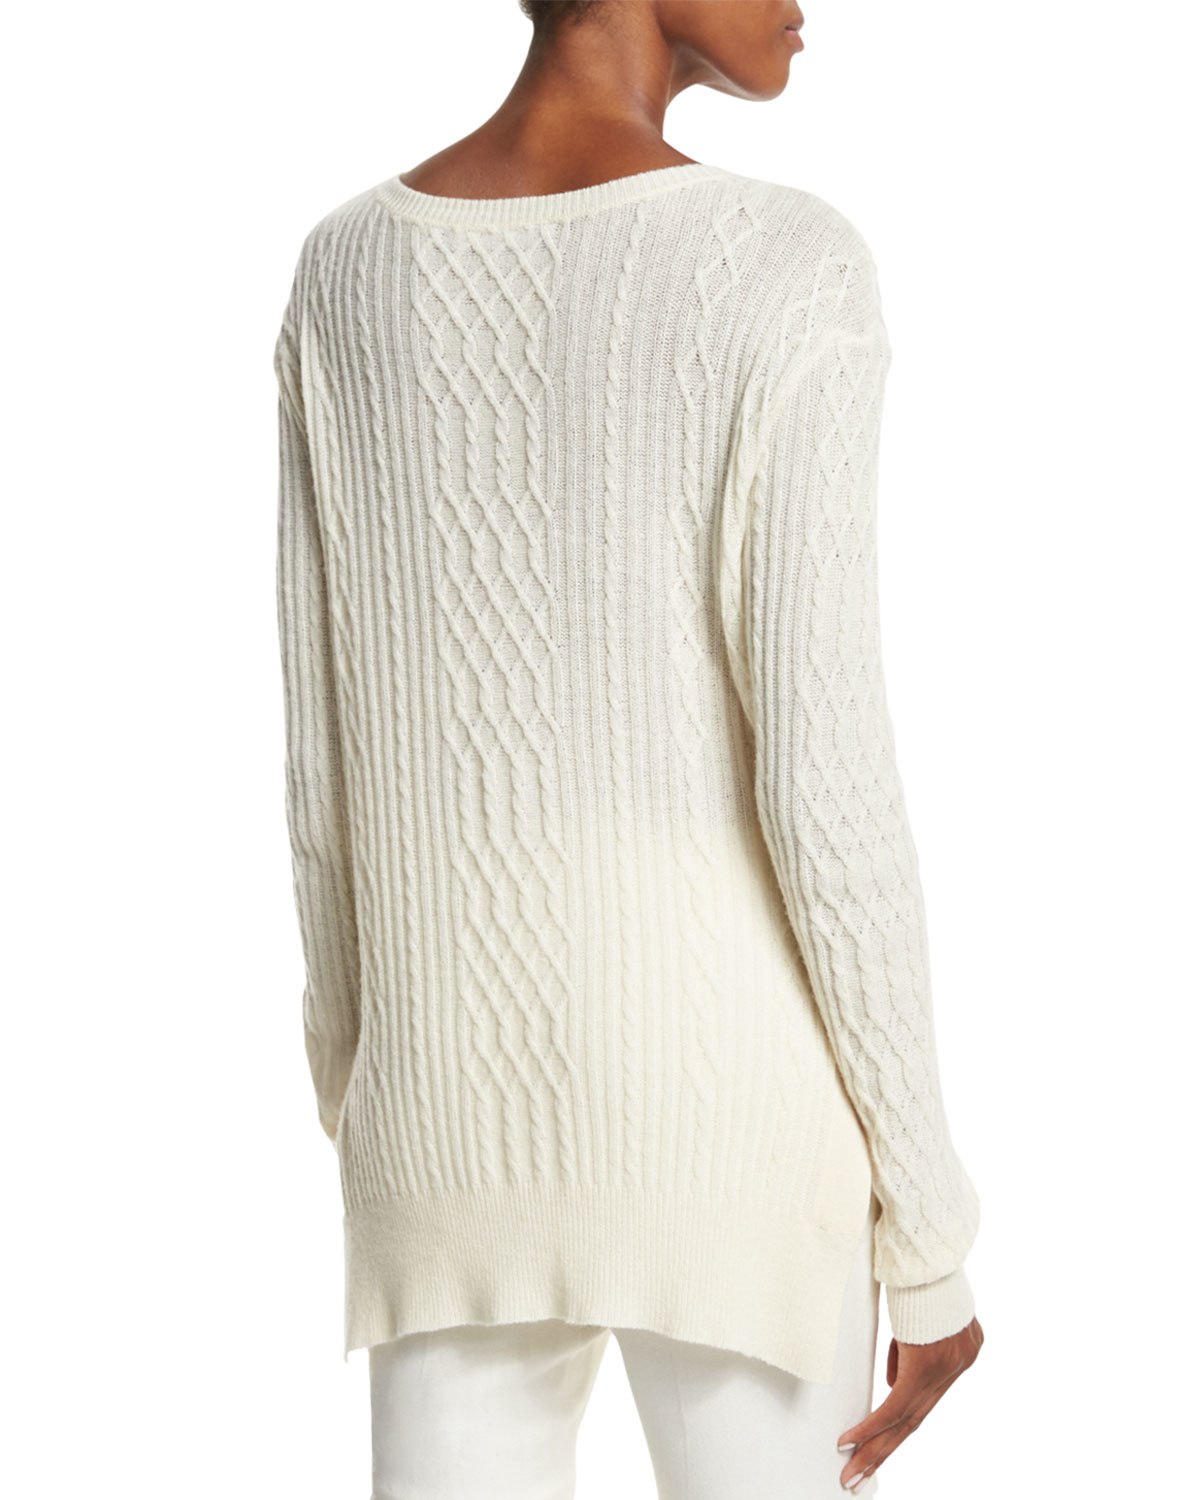 Ralph lauren collection Open-weave Cashmere Tunic Sweater in White ...